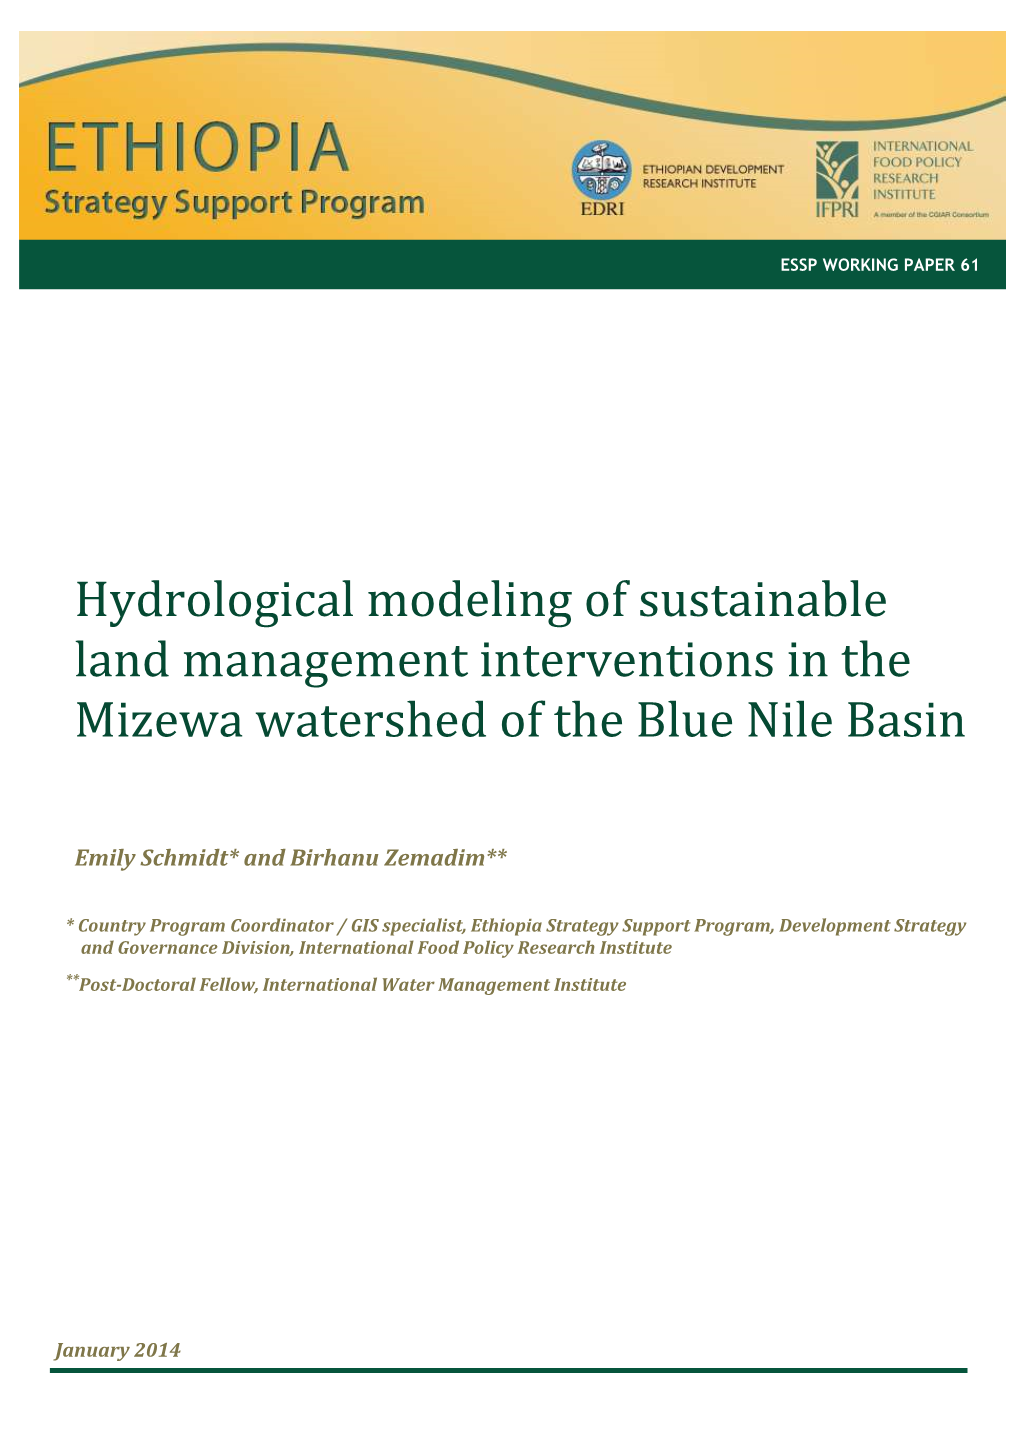 Hydrological Modeling of Sustainable Land Management Interventions in the Mizewa Watershed of the Blue Nile Basin